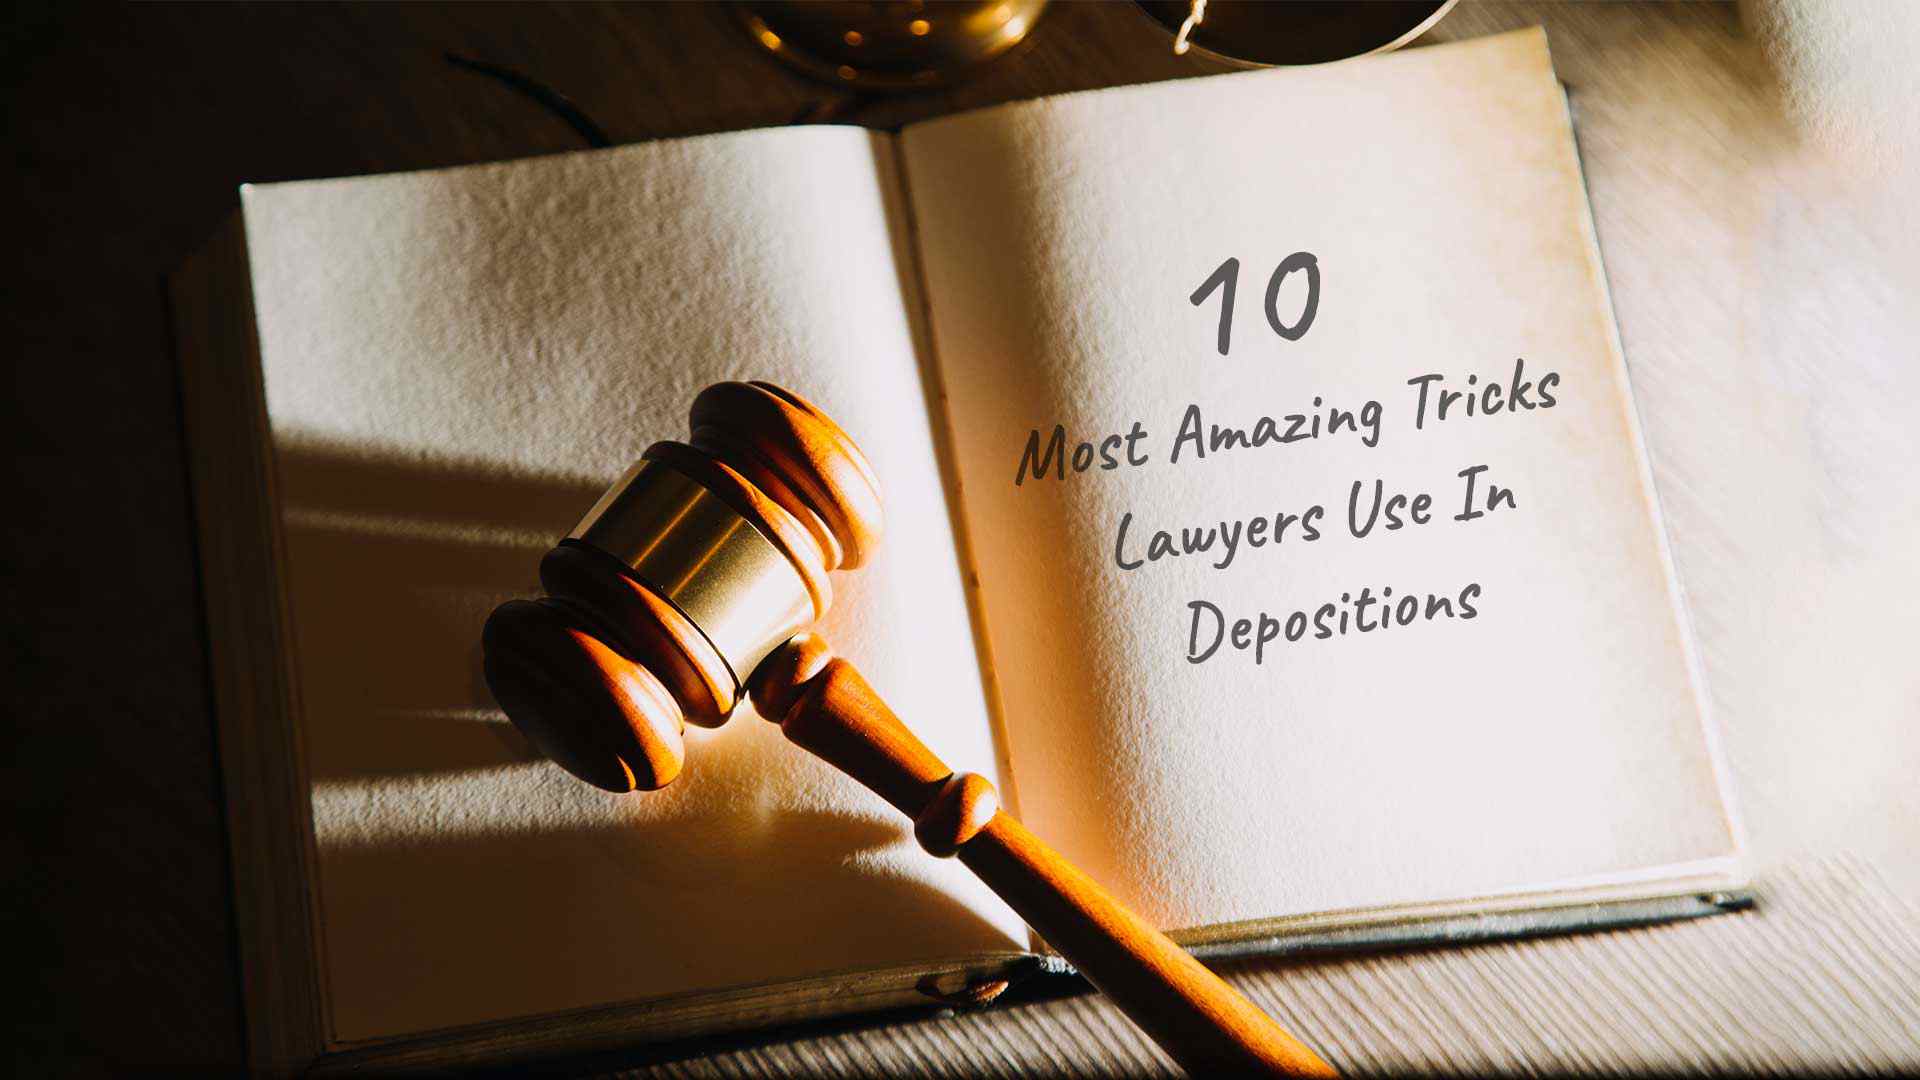 10 most amazing tricks lawyers use in depositions